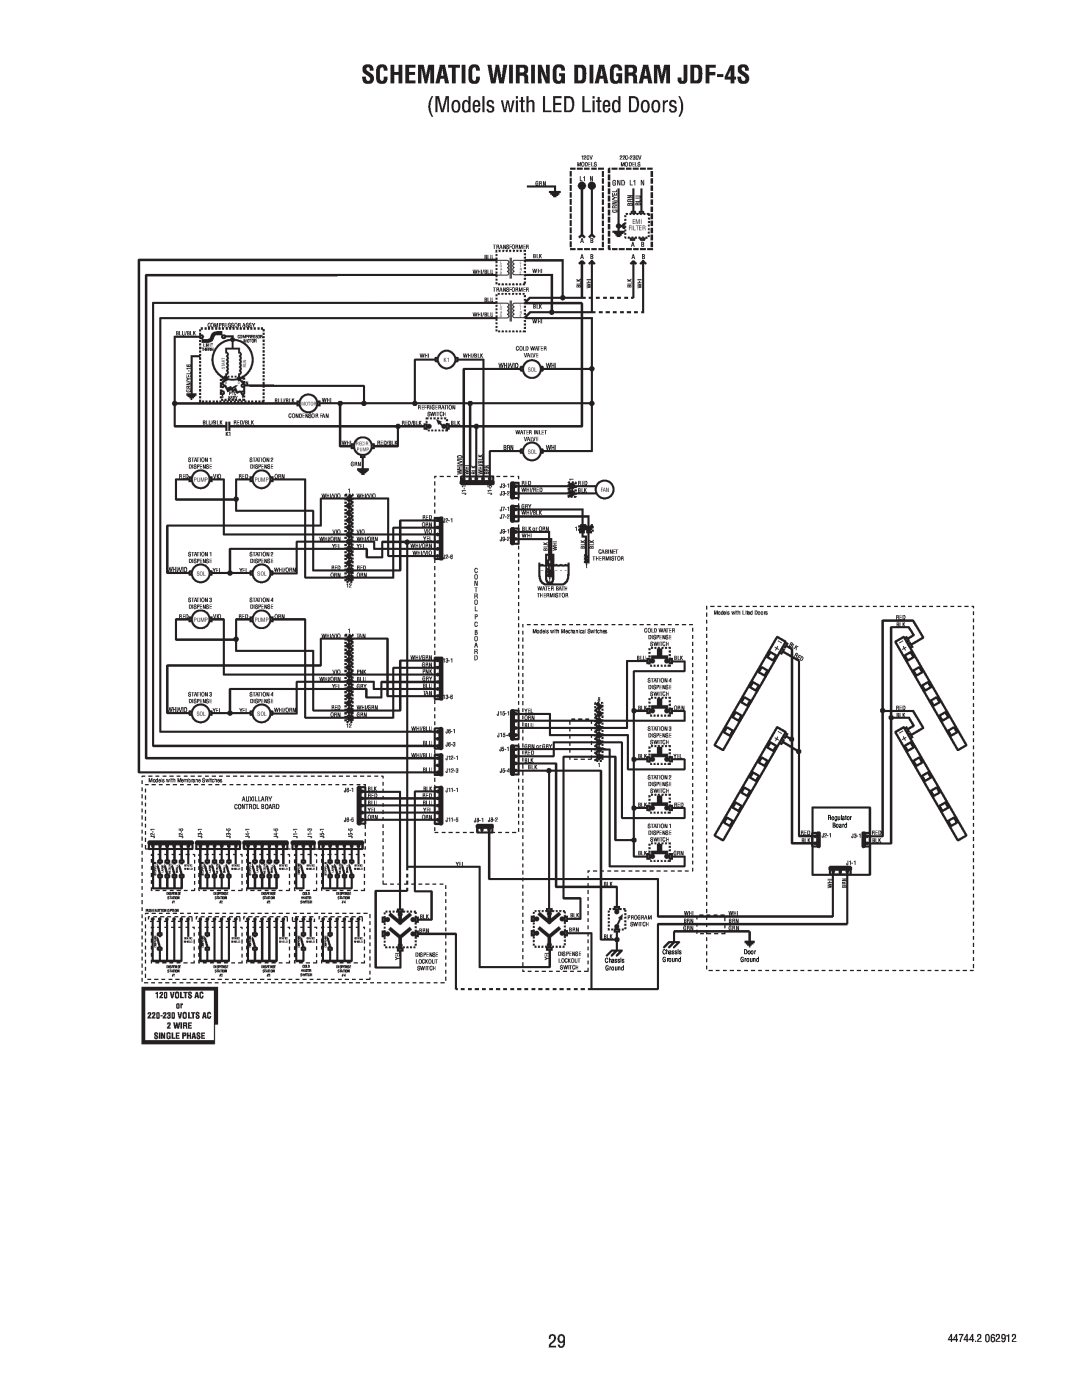 Bunn service manual SCHEMATIC WIRING DIAGRAM JDF-4S, 44744.2, Volts Ac, 220-230VOLTS AC, Wire, Single Phase 